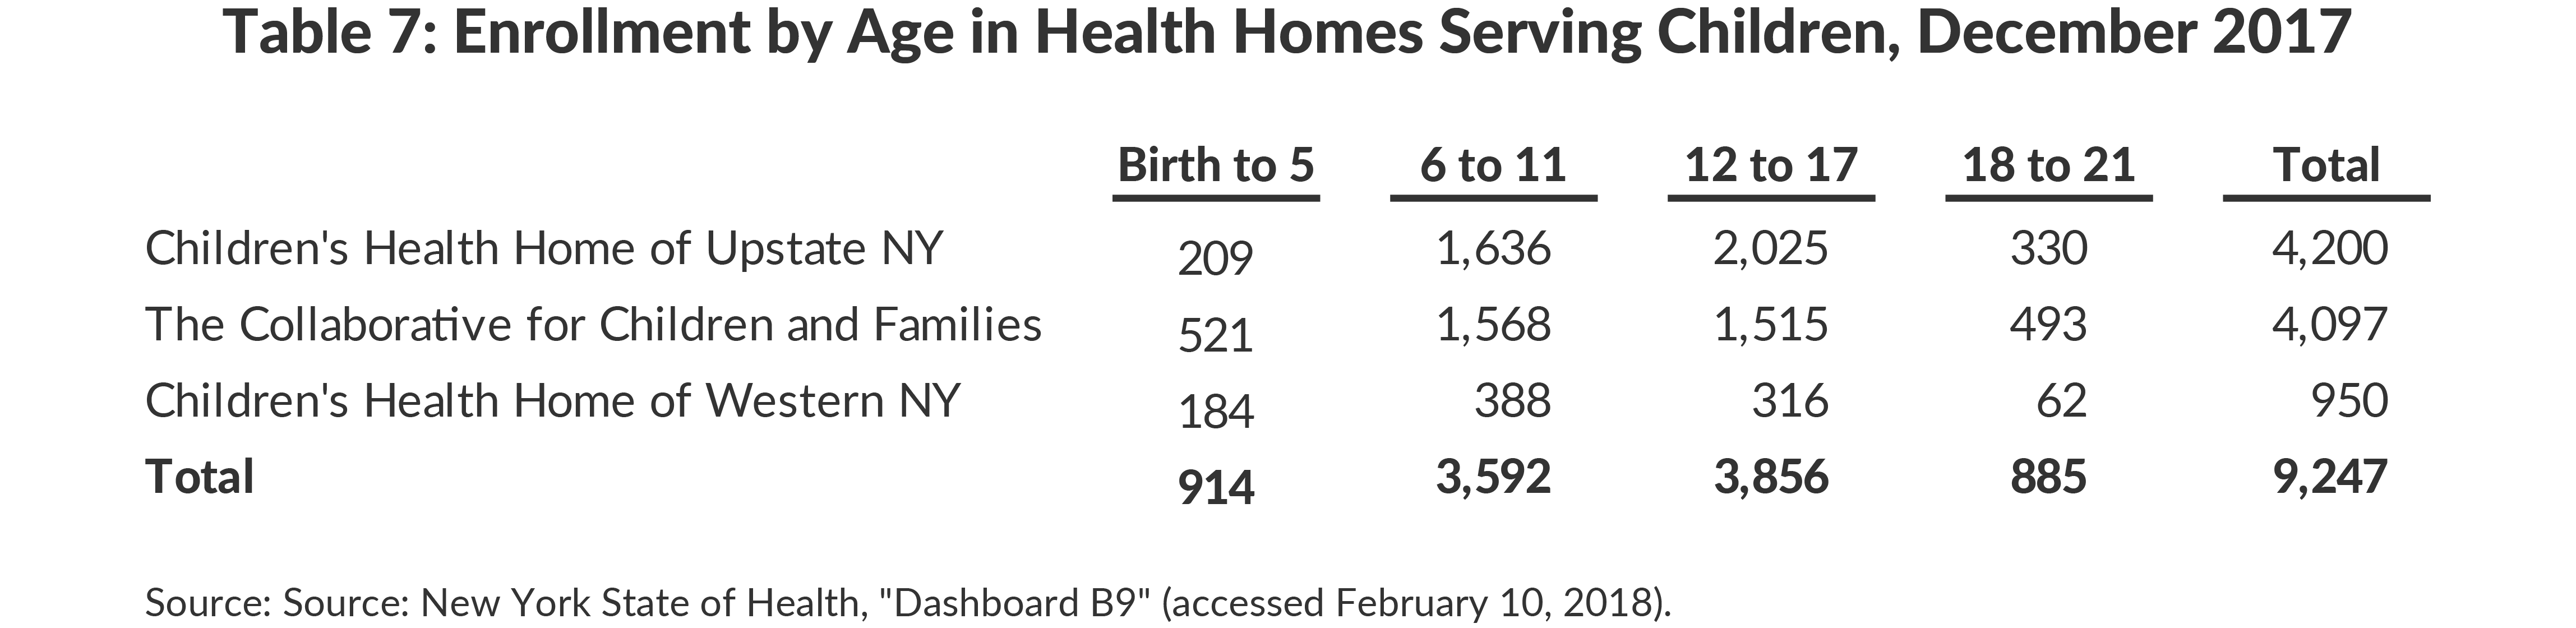 Table 7: Enrollment by Age in Health Homes Serving Children, December 2017